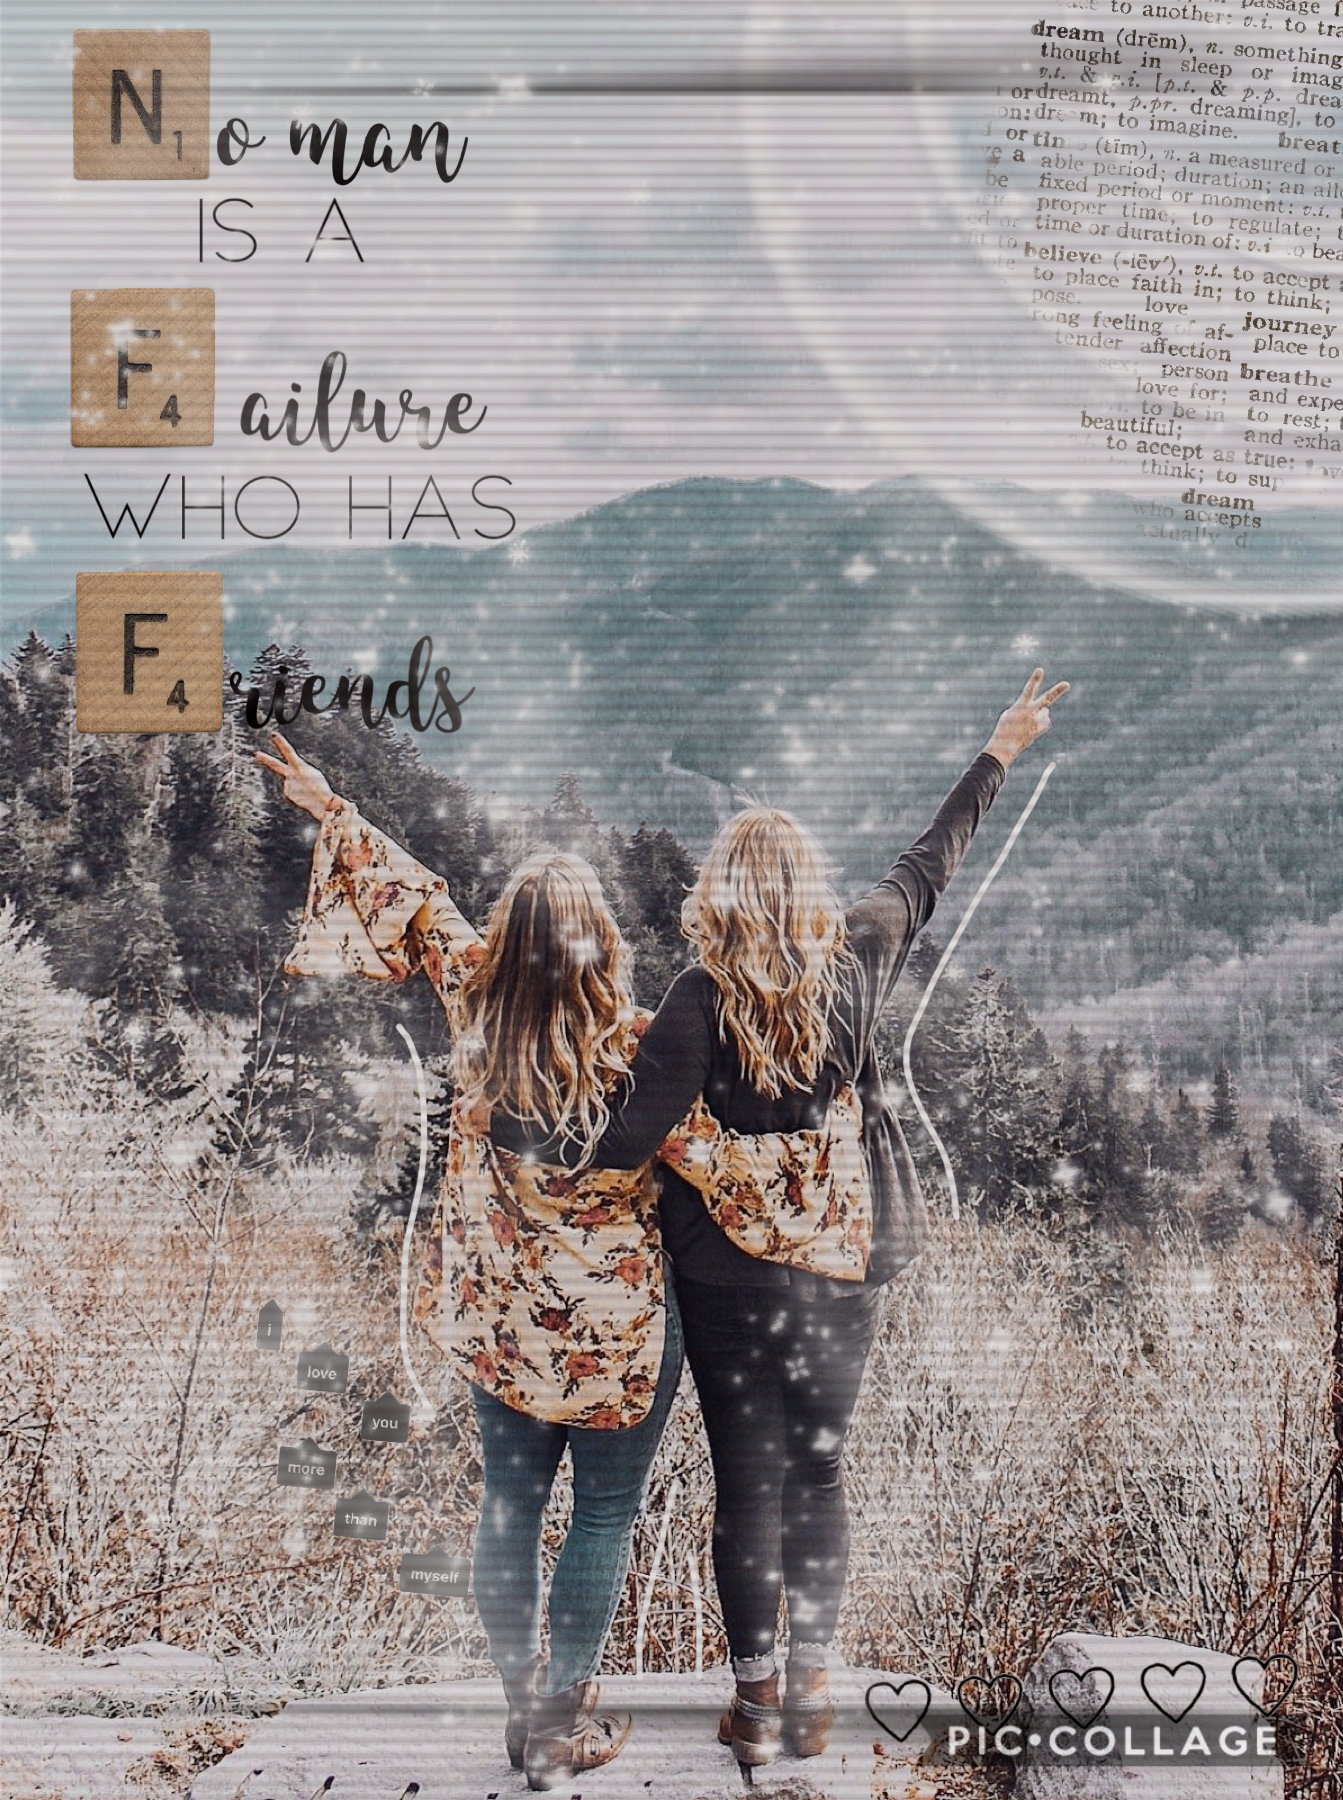 💖🌺Tap🌺💖
“No man is a failure who has friends”
This is the truth